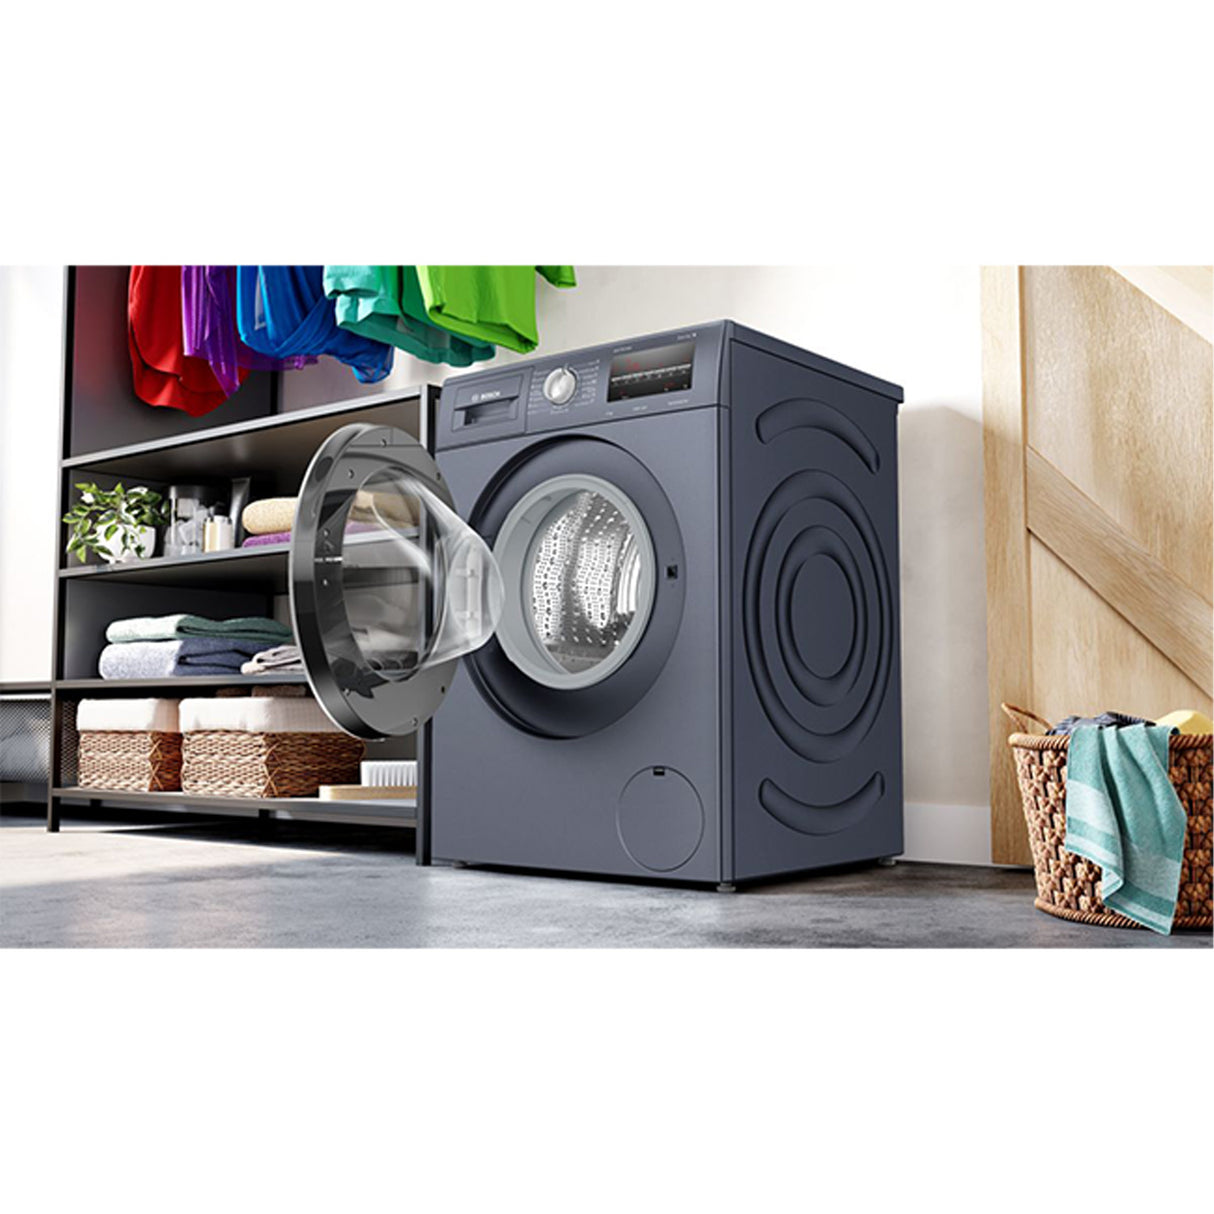 Powerful cleaning: Bosch Series 6 Front Load - 8 kg, 1400 RPM.